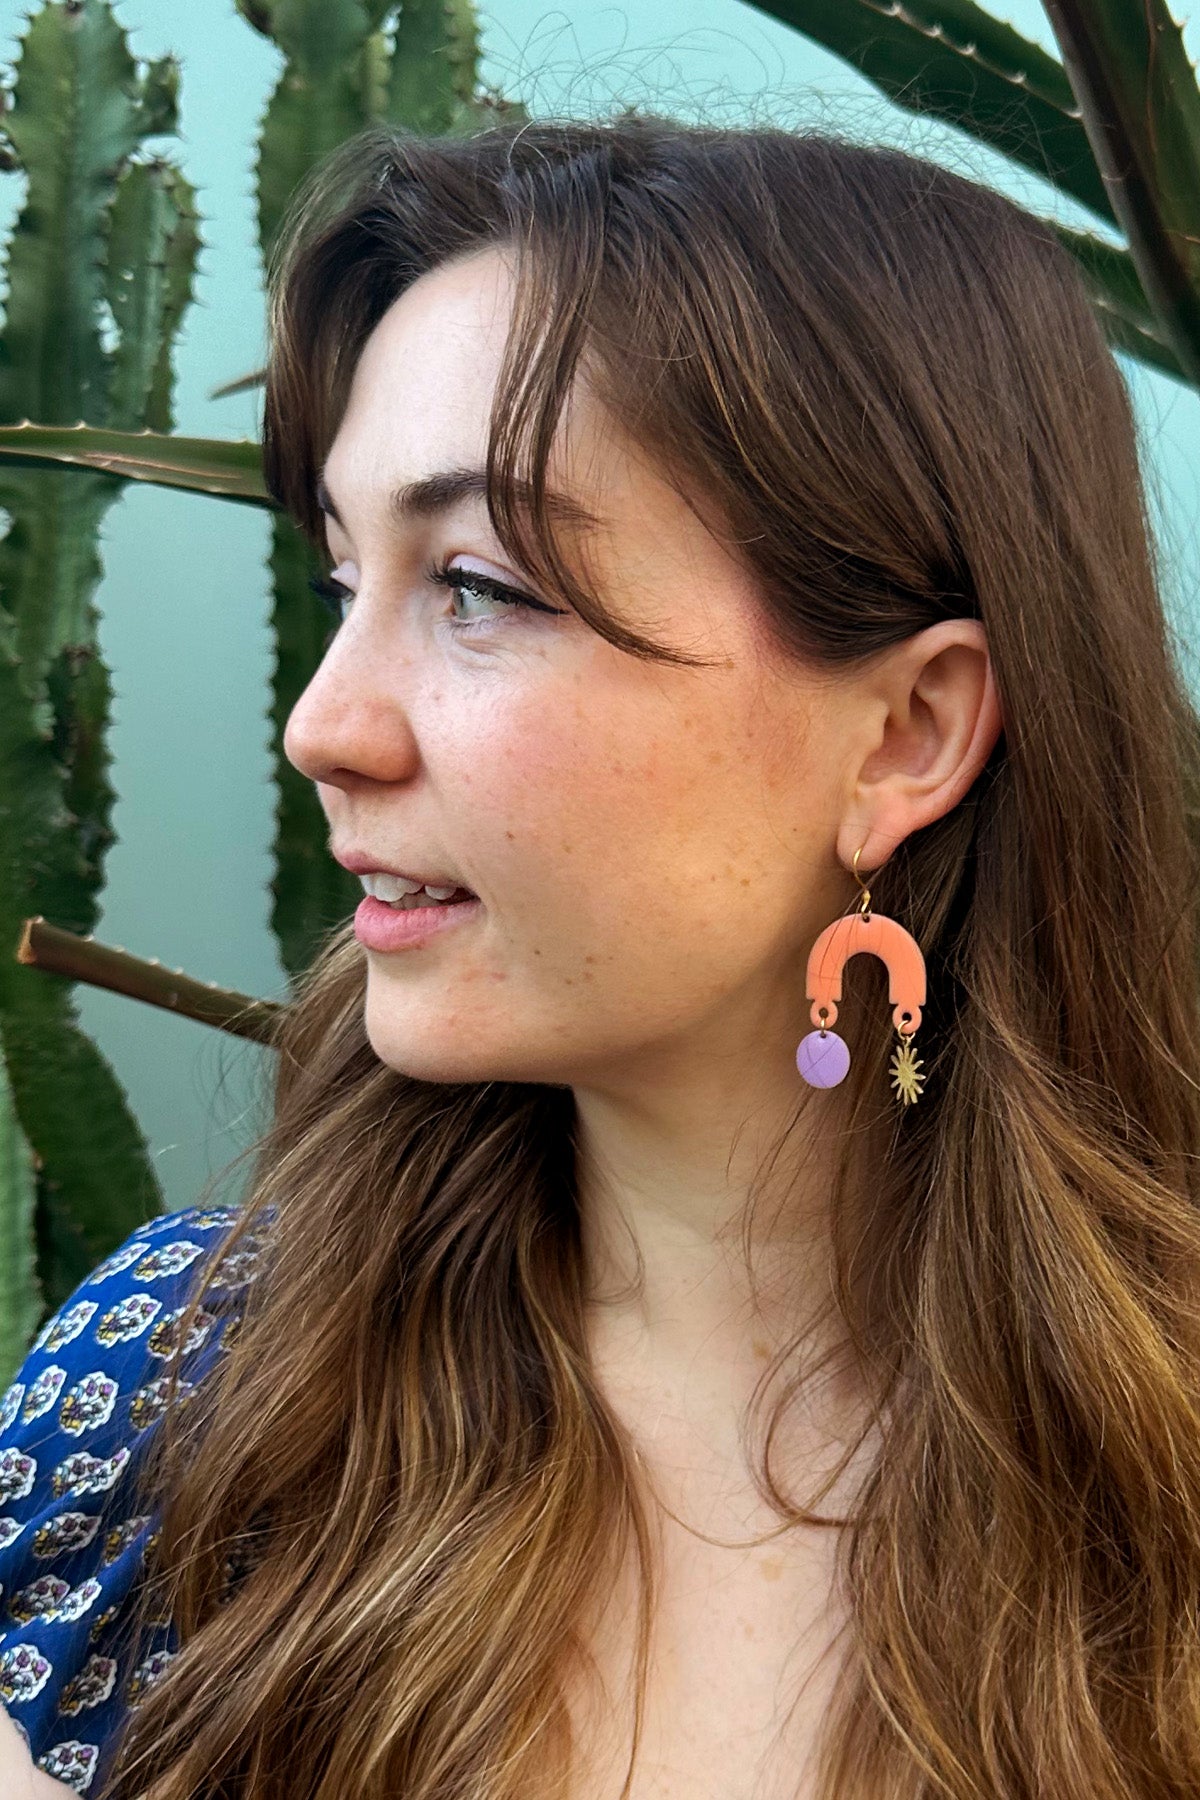 CONFECTION EARRINGS